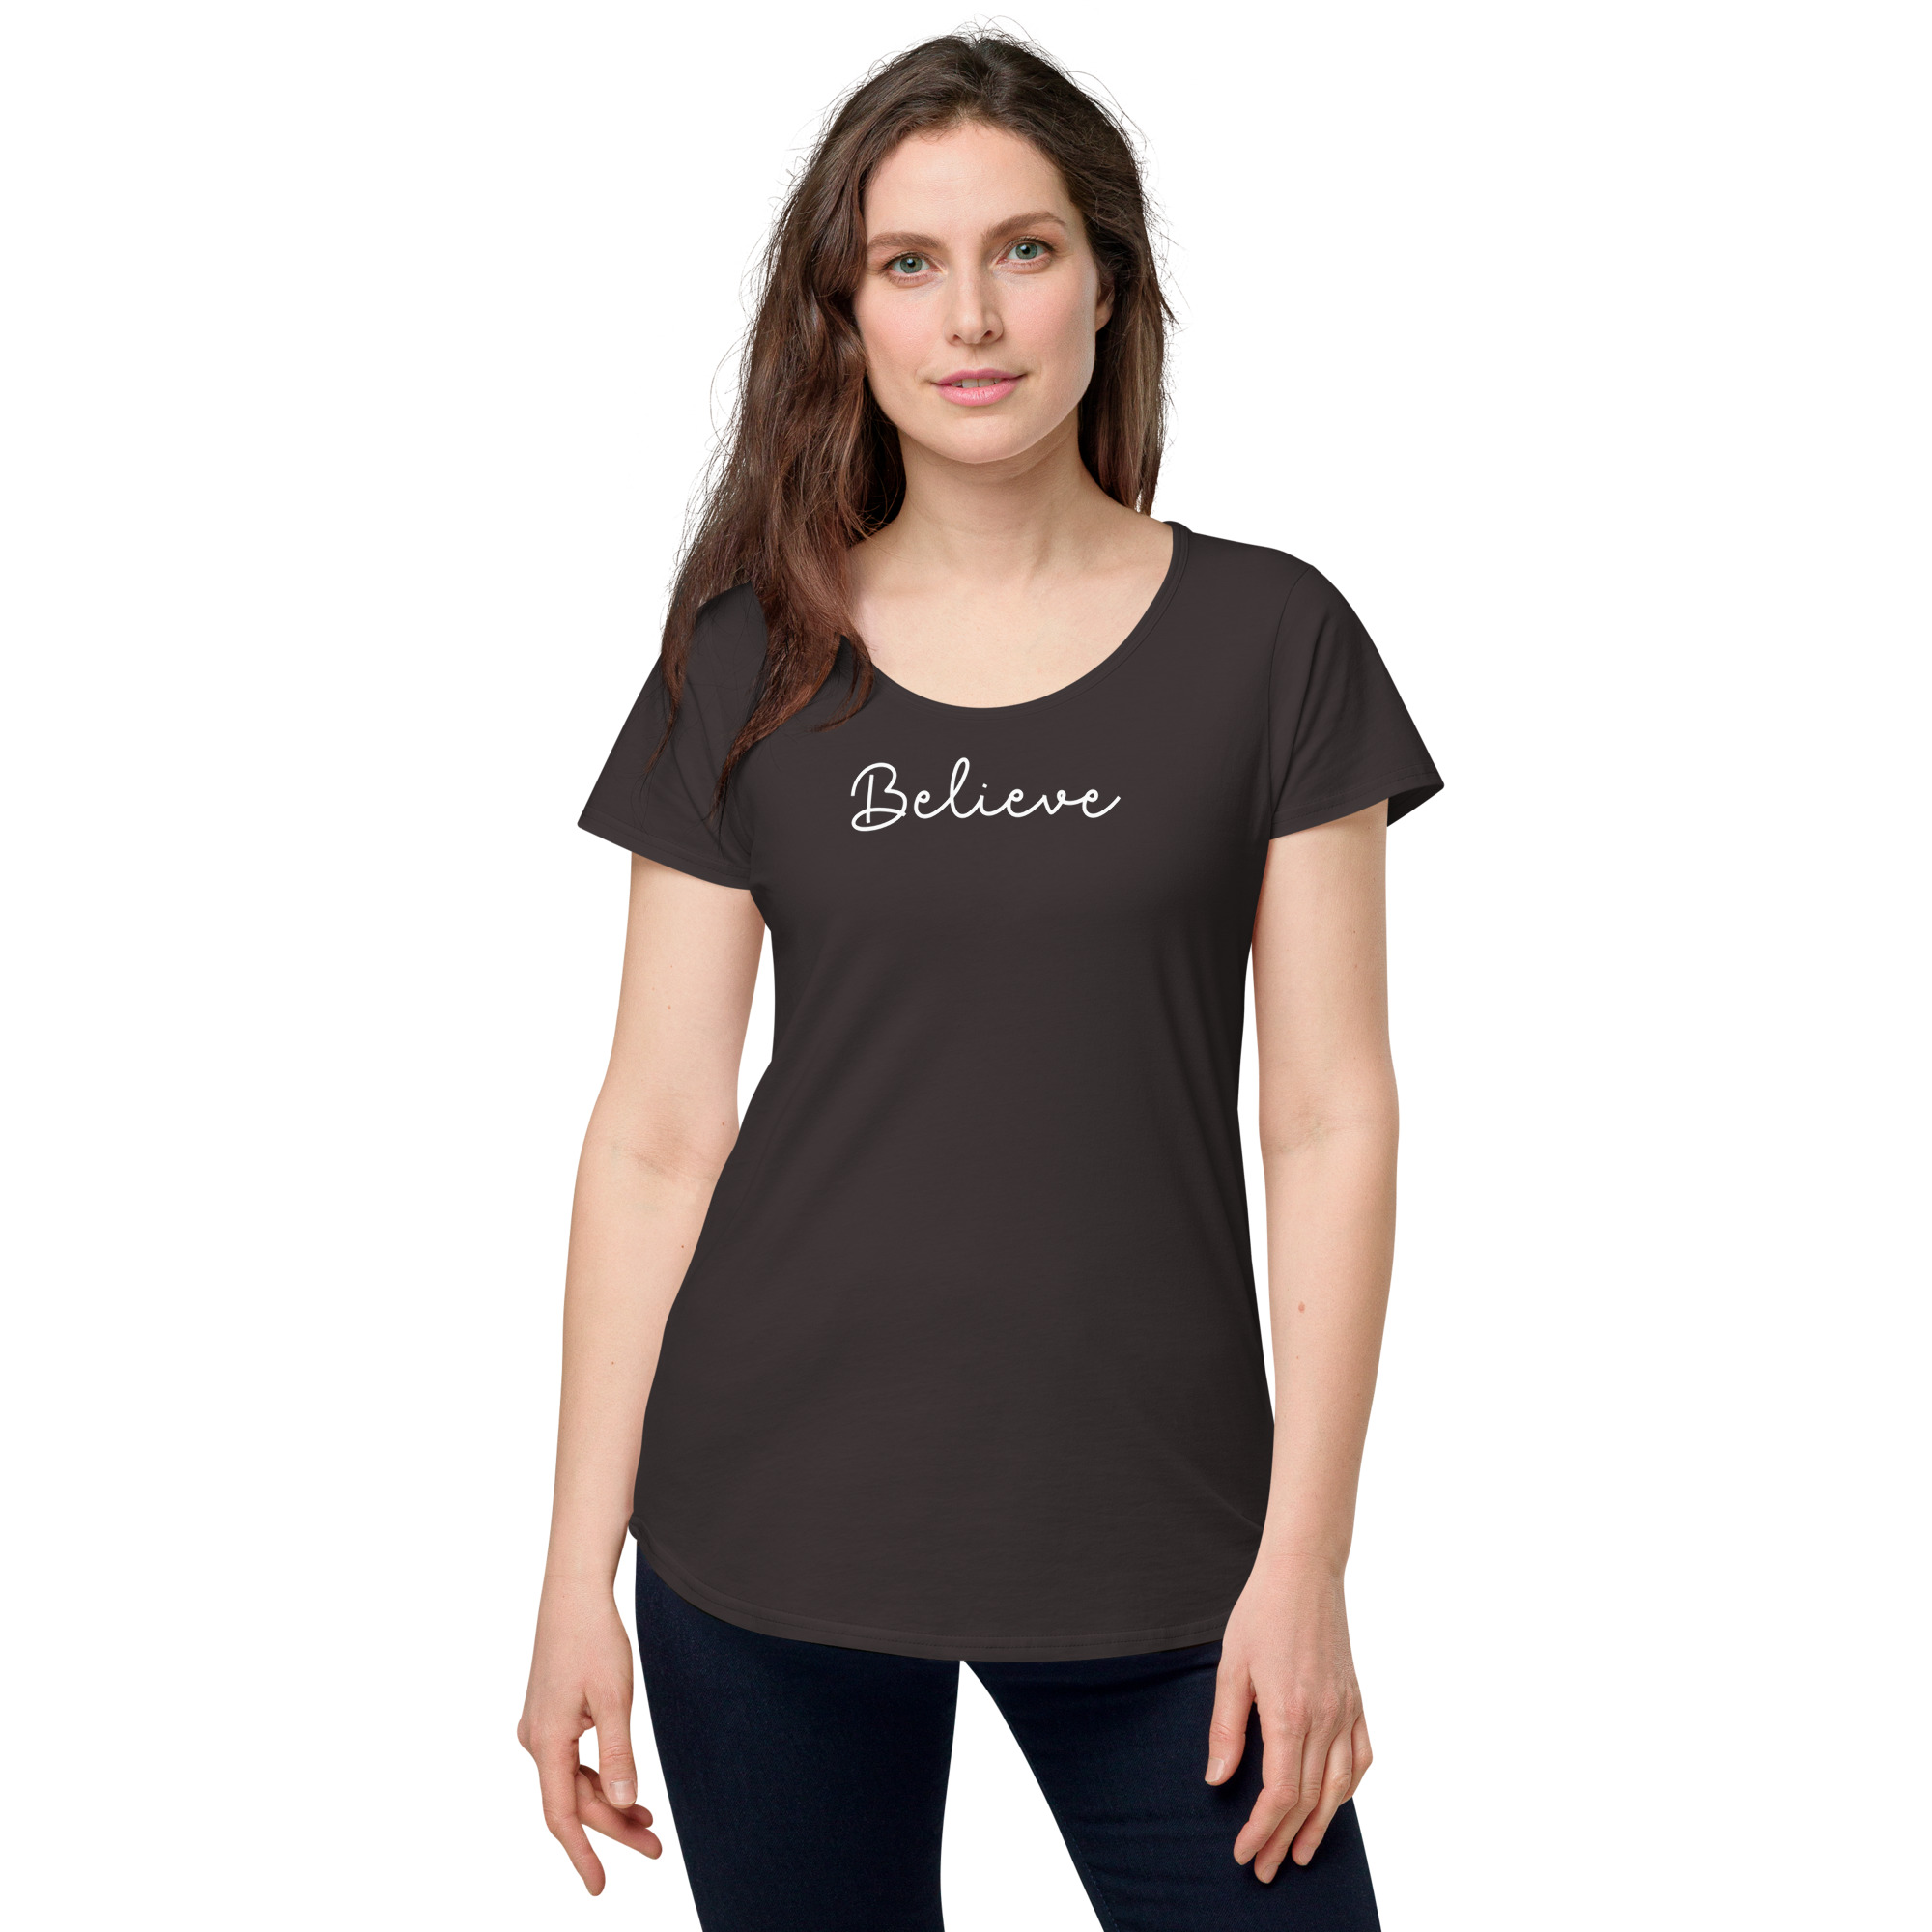 womens-round-neck-tee-coal-front-2-634dd8771a0ce.jpg